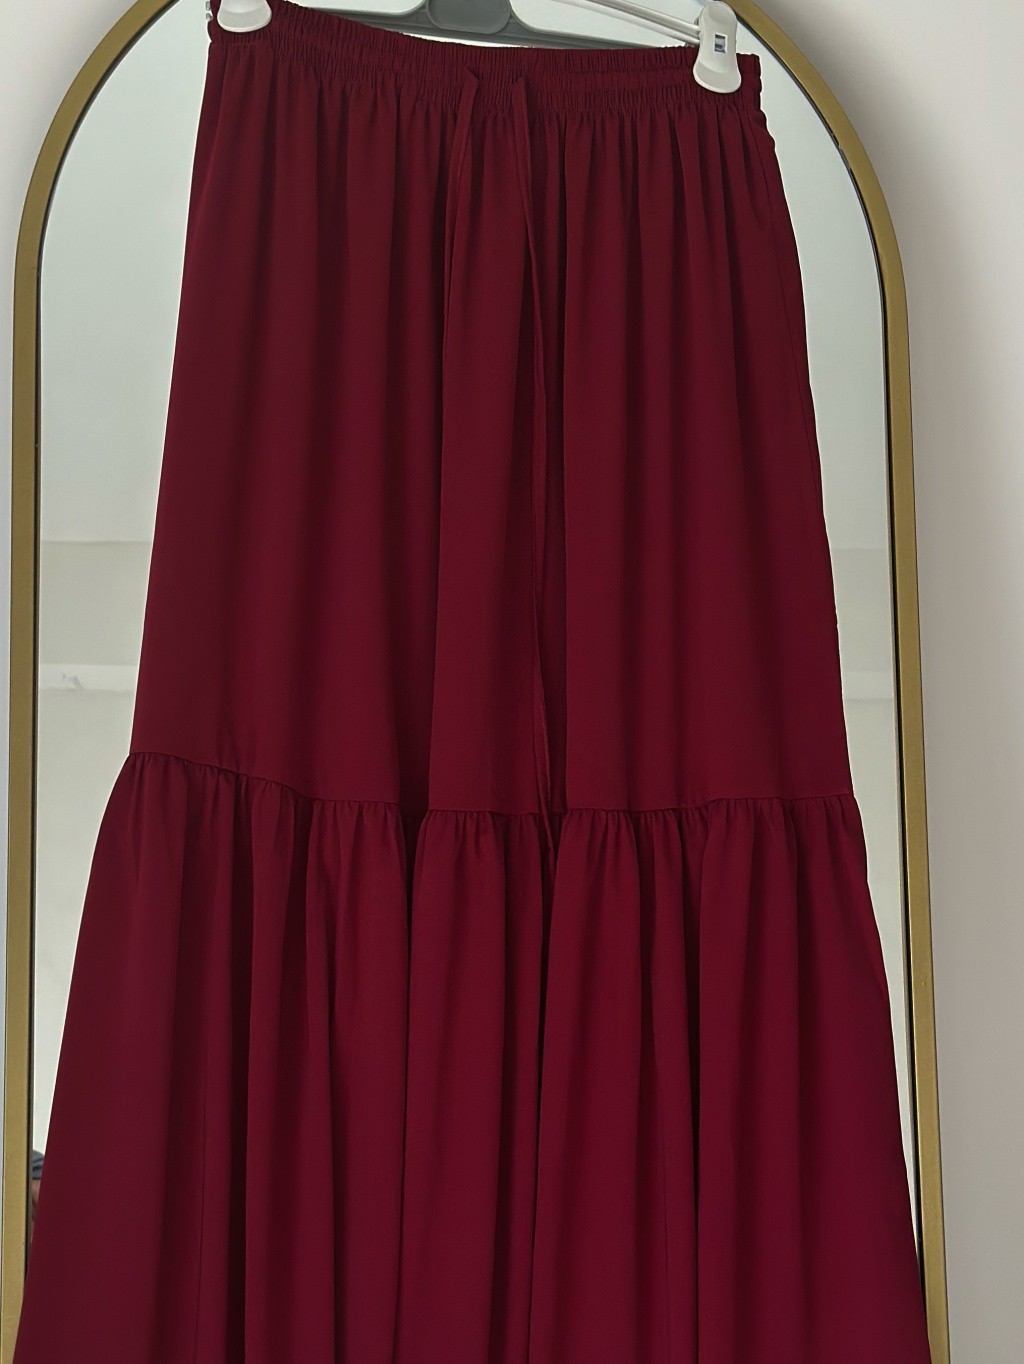 LAYER SKIRT Claret Red